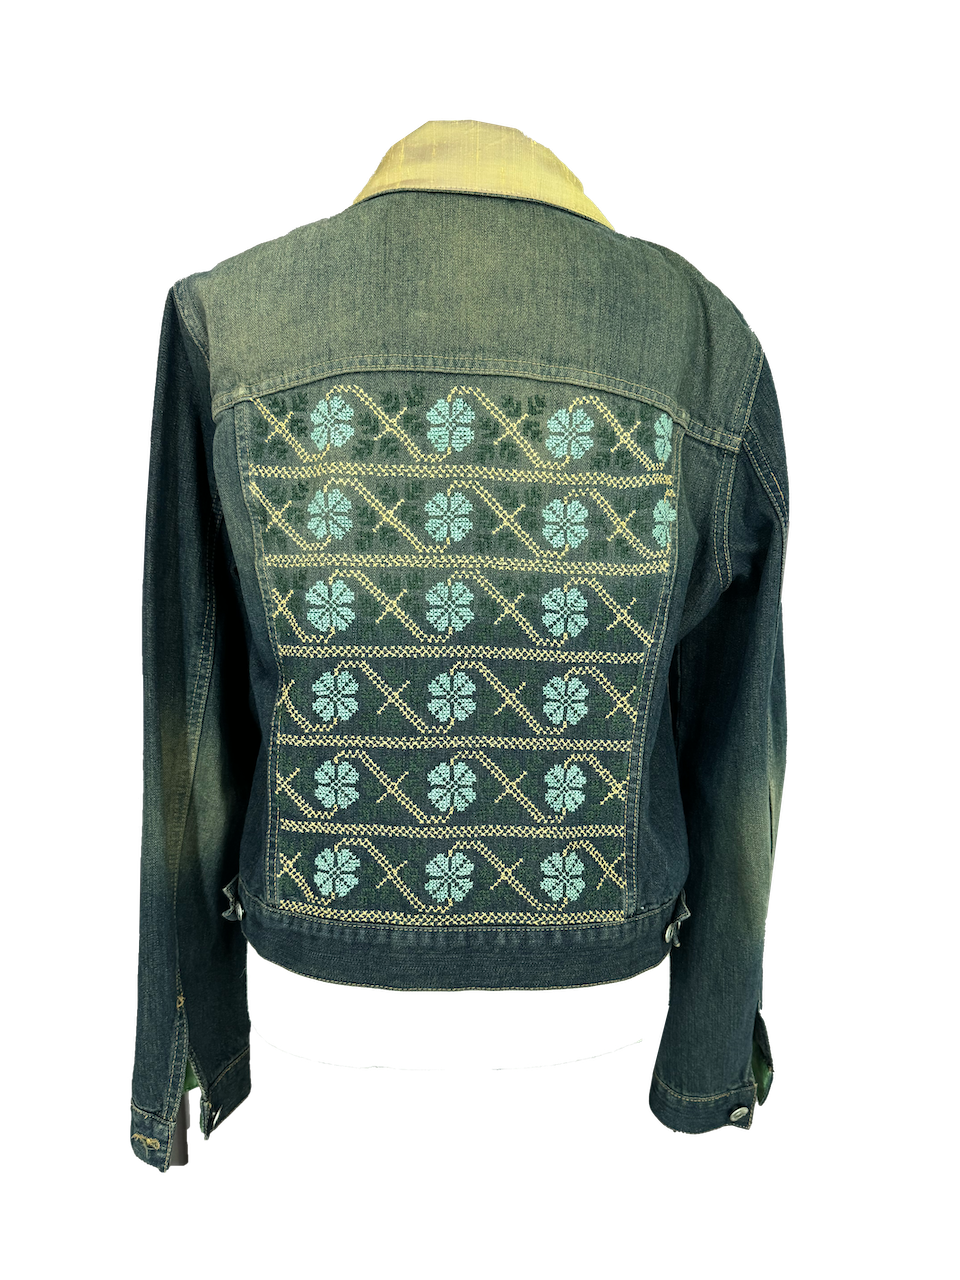 The Embroidered Denim Jacket in Blue and Green